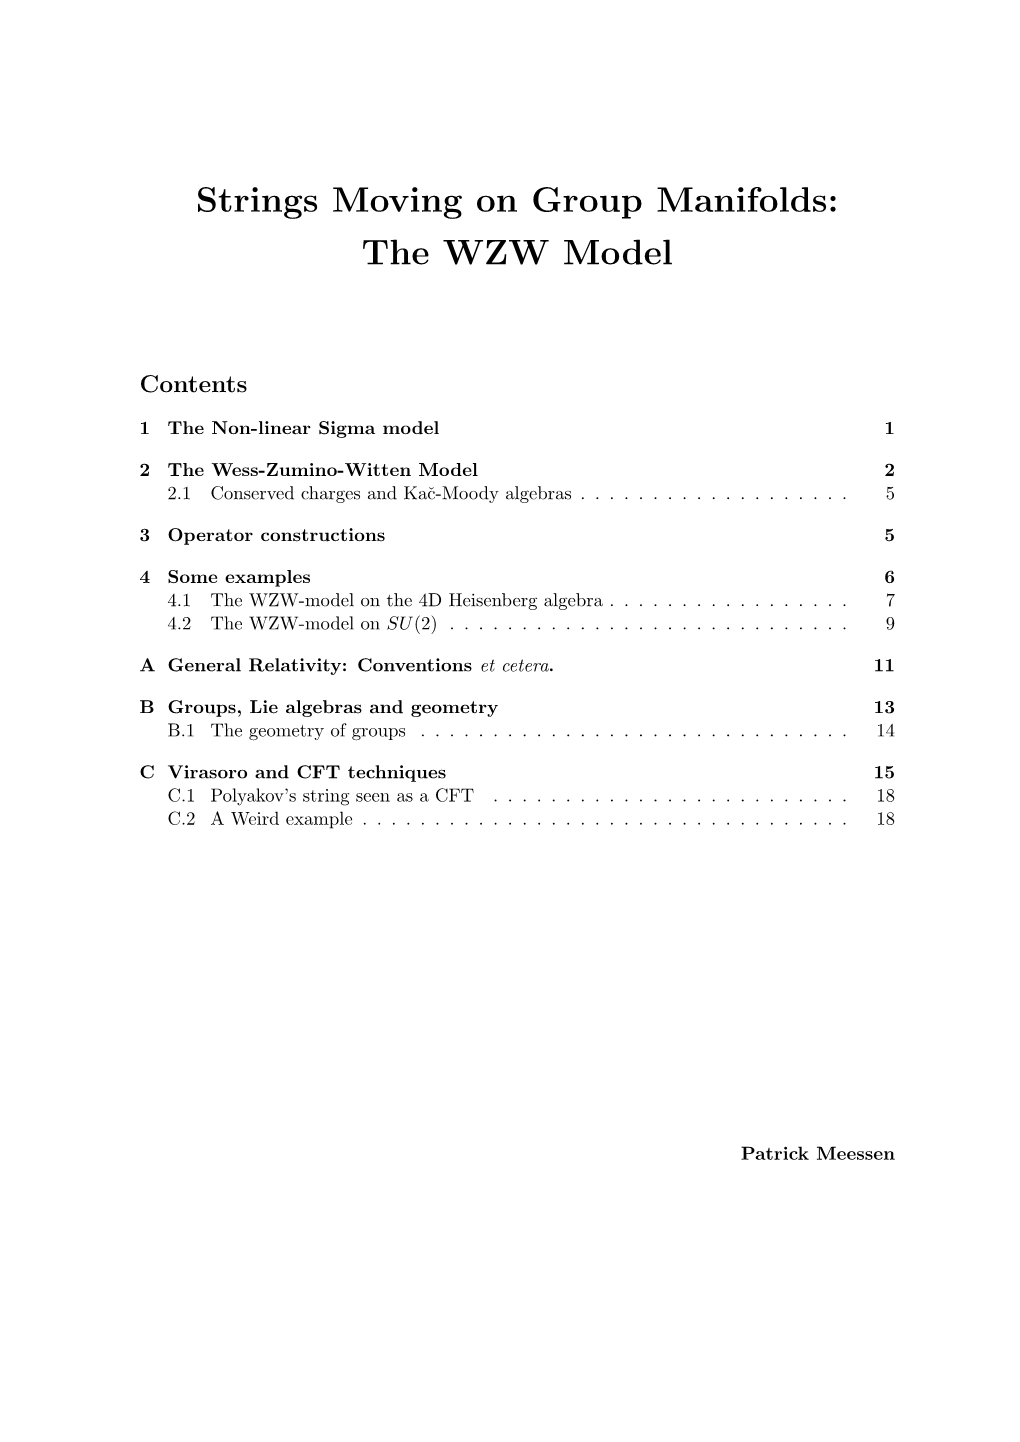 Strings Moving on Group Manifolds: the WZW Model